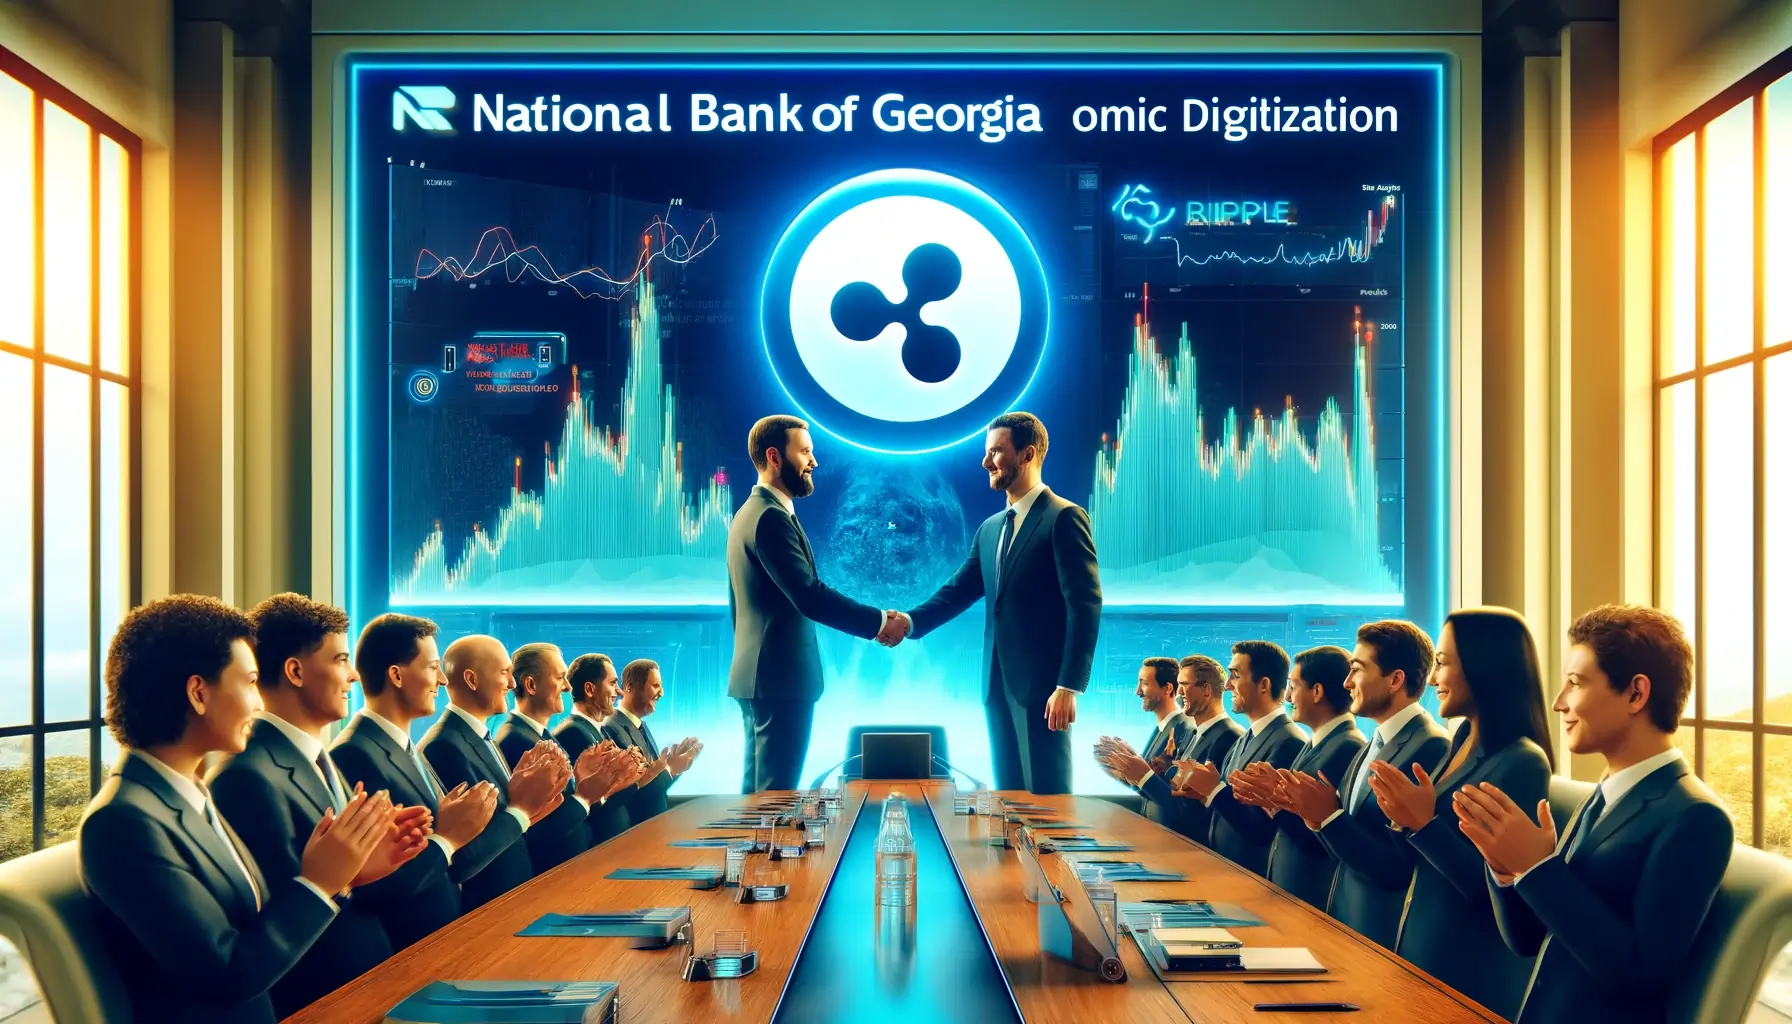 National Bank of Georgia Teams Up with Ripple for Economic Digitization